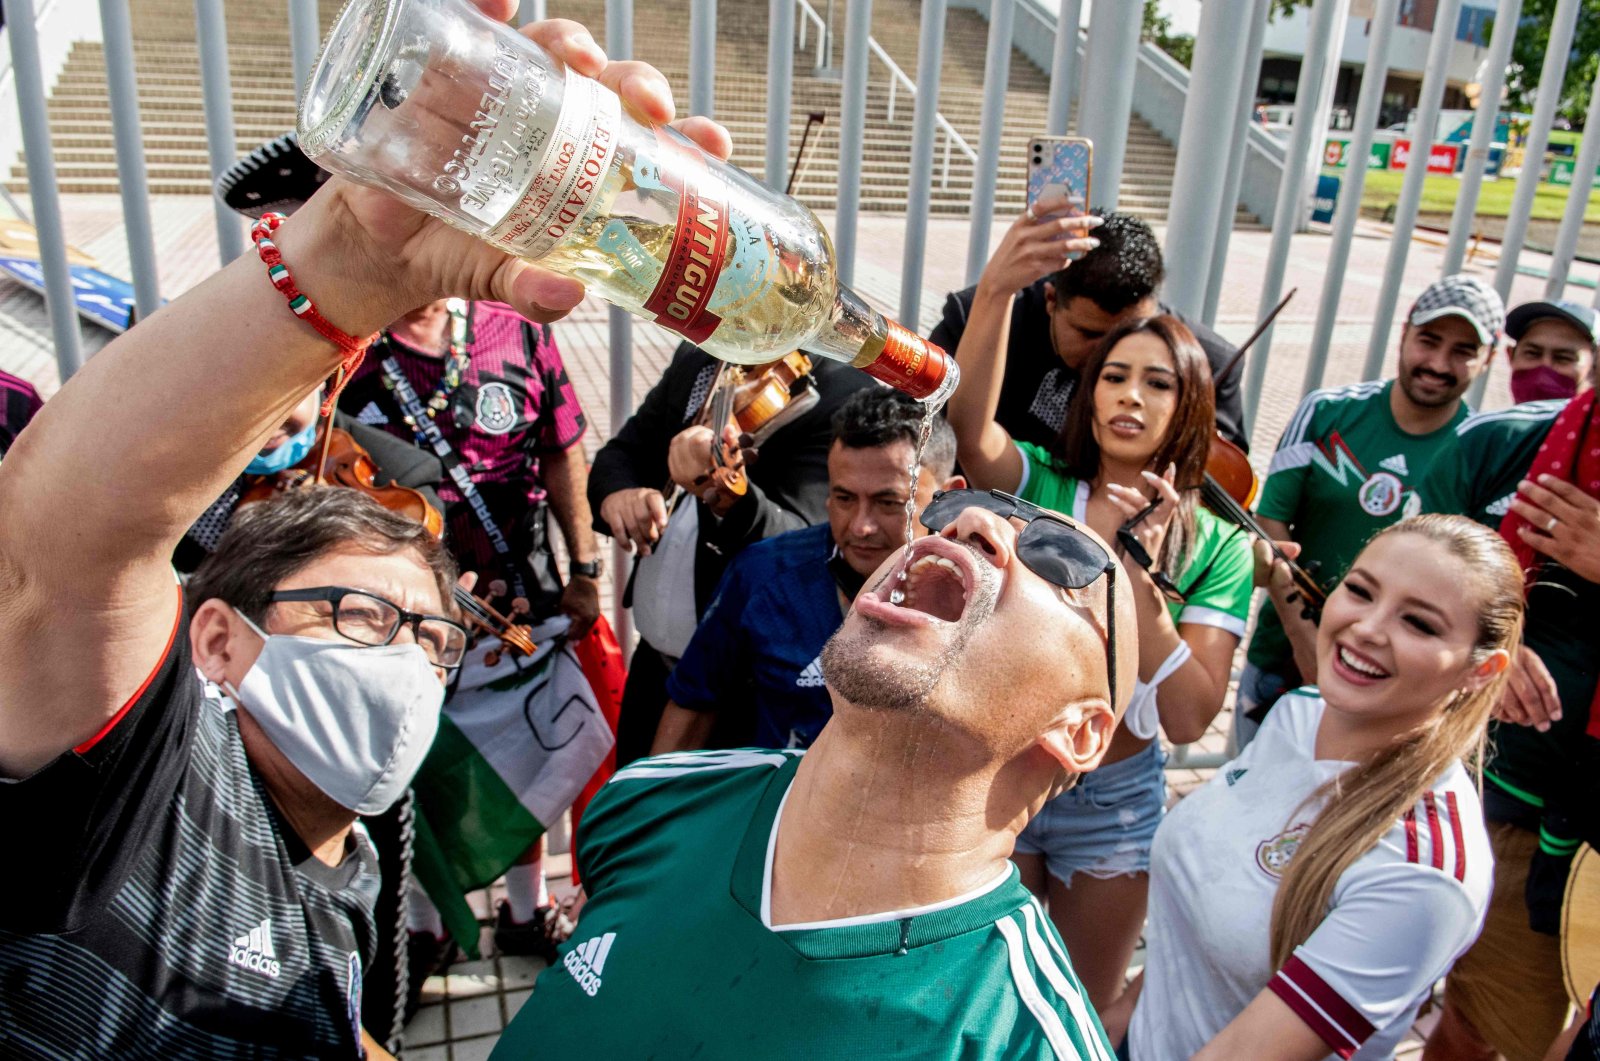 Mexican fans drink tequila outside the National Stadium before the Qatar 2022 FIFA World Cup qualifier match against Costa Rica, San Jose, Costa Rica, Sept. 5, 2021. (AFP Photo)